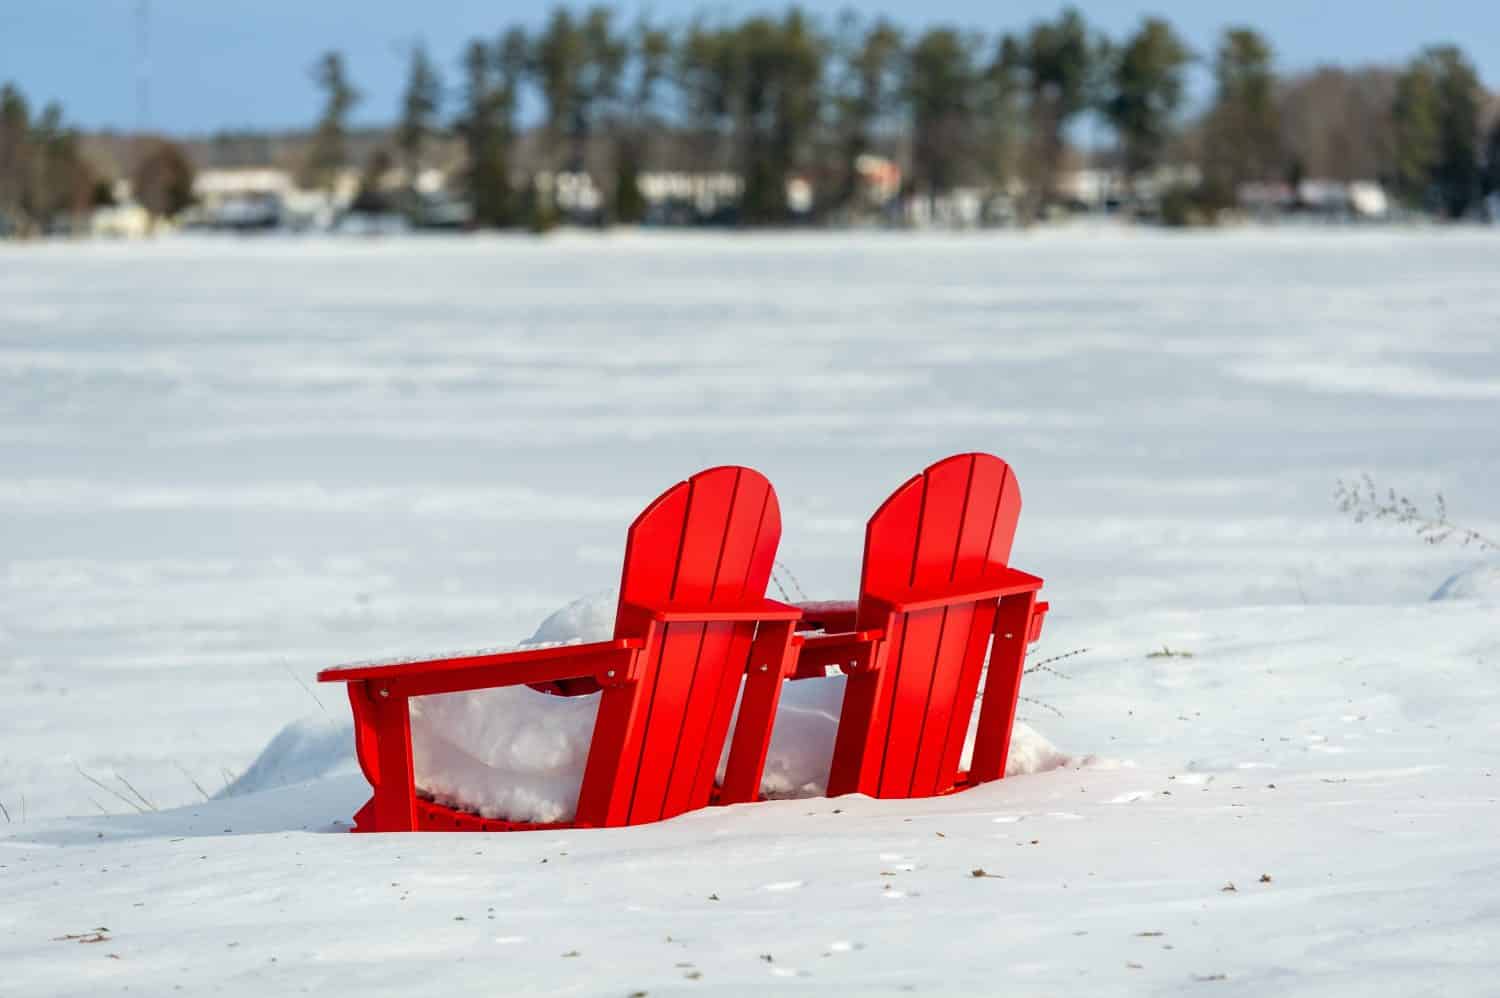 Peaceful winter setting in the Muskoka, Ontario, Canada. Two red Adirondack chairs are covered in a blanket of snow, giving the impression of untouched serenity.